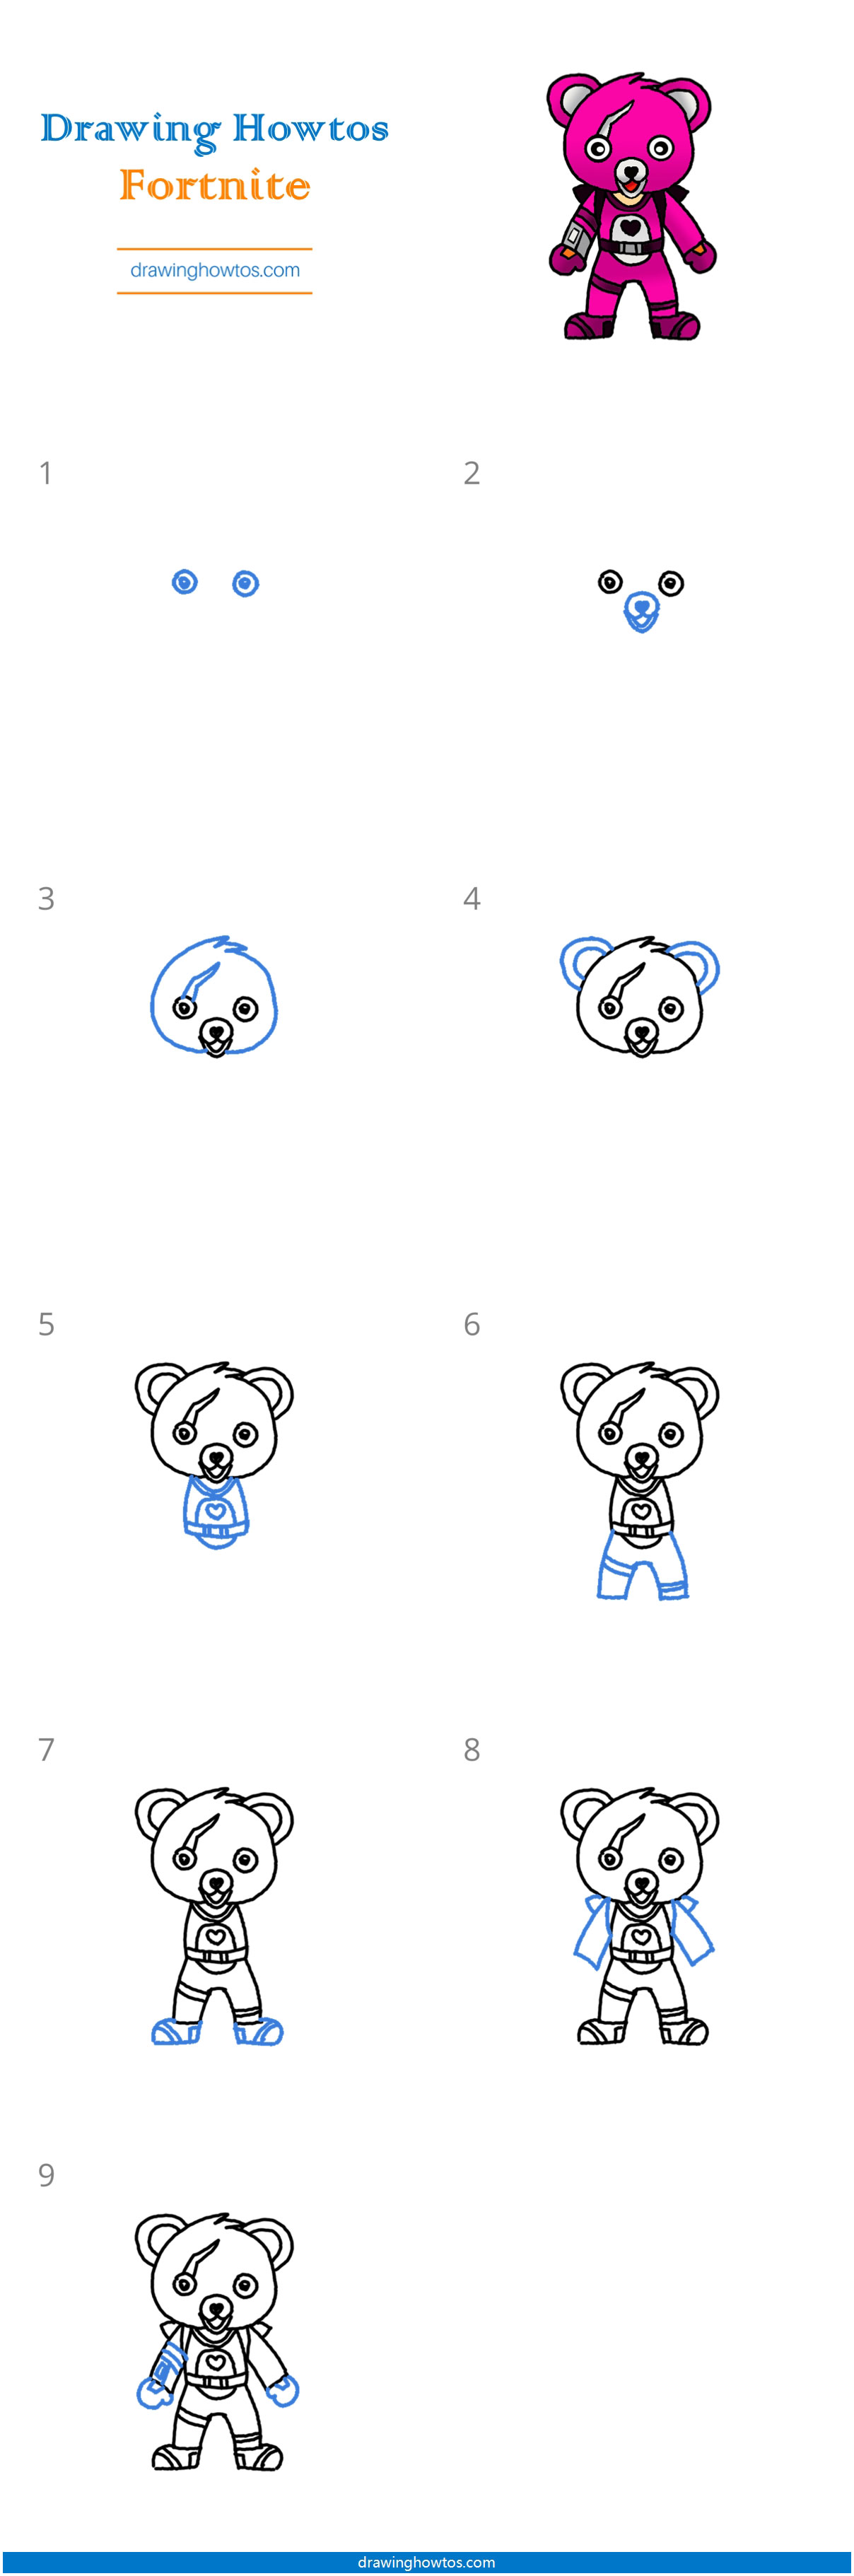 How to Draw Cuddle Team Leader from Fortnite Step by Step